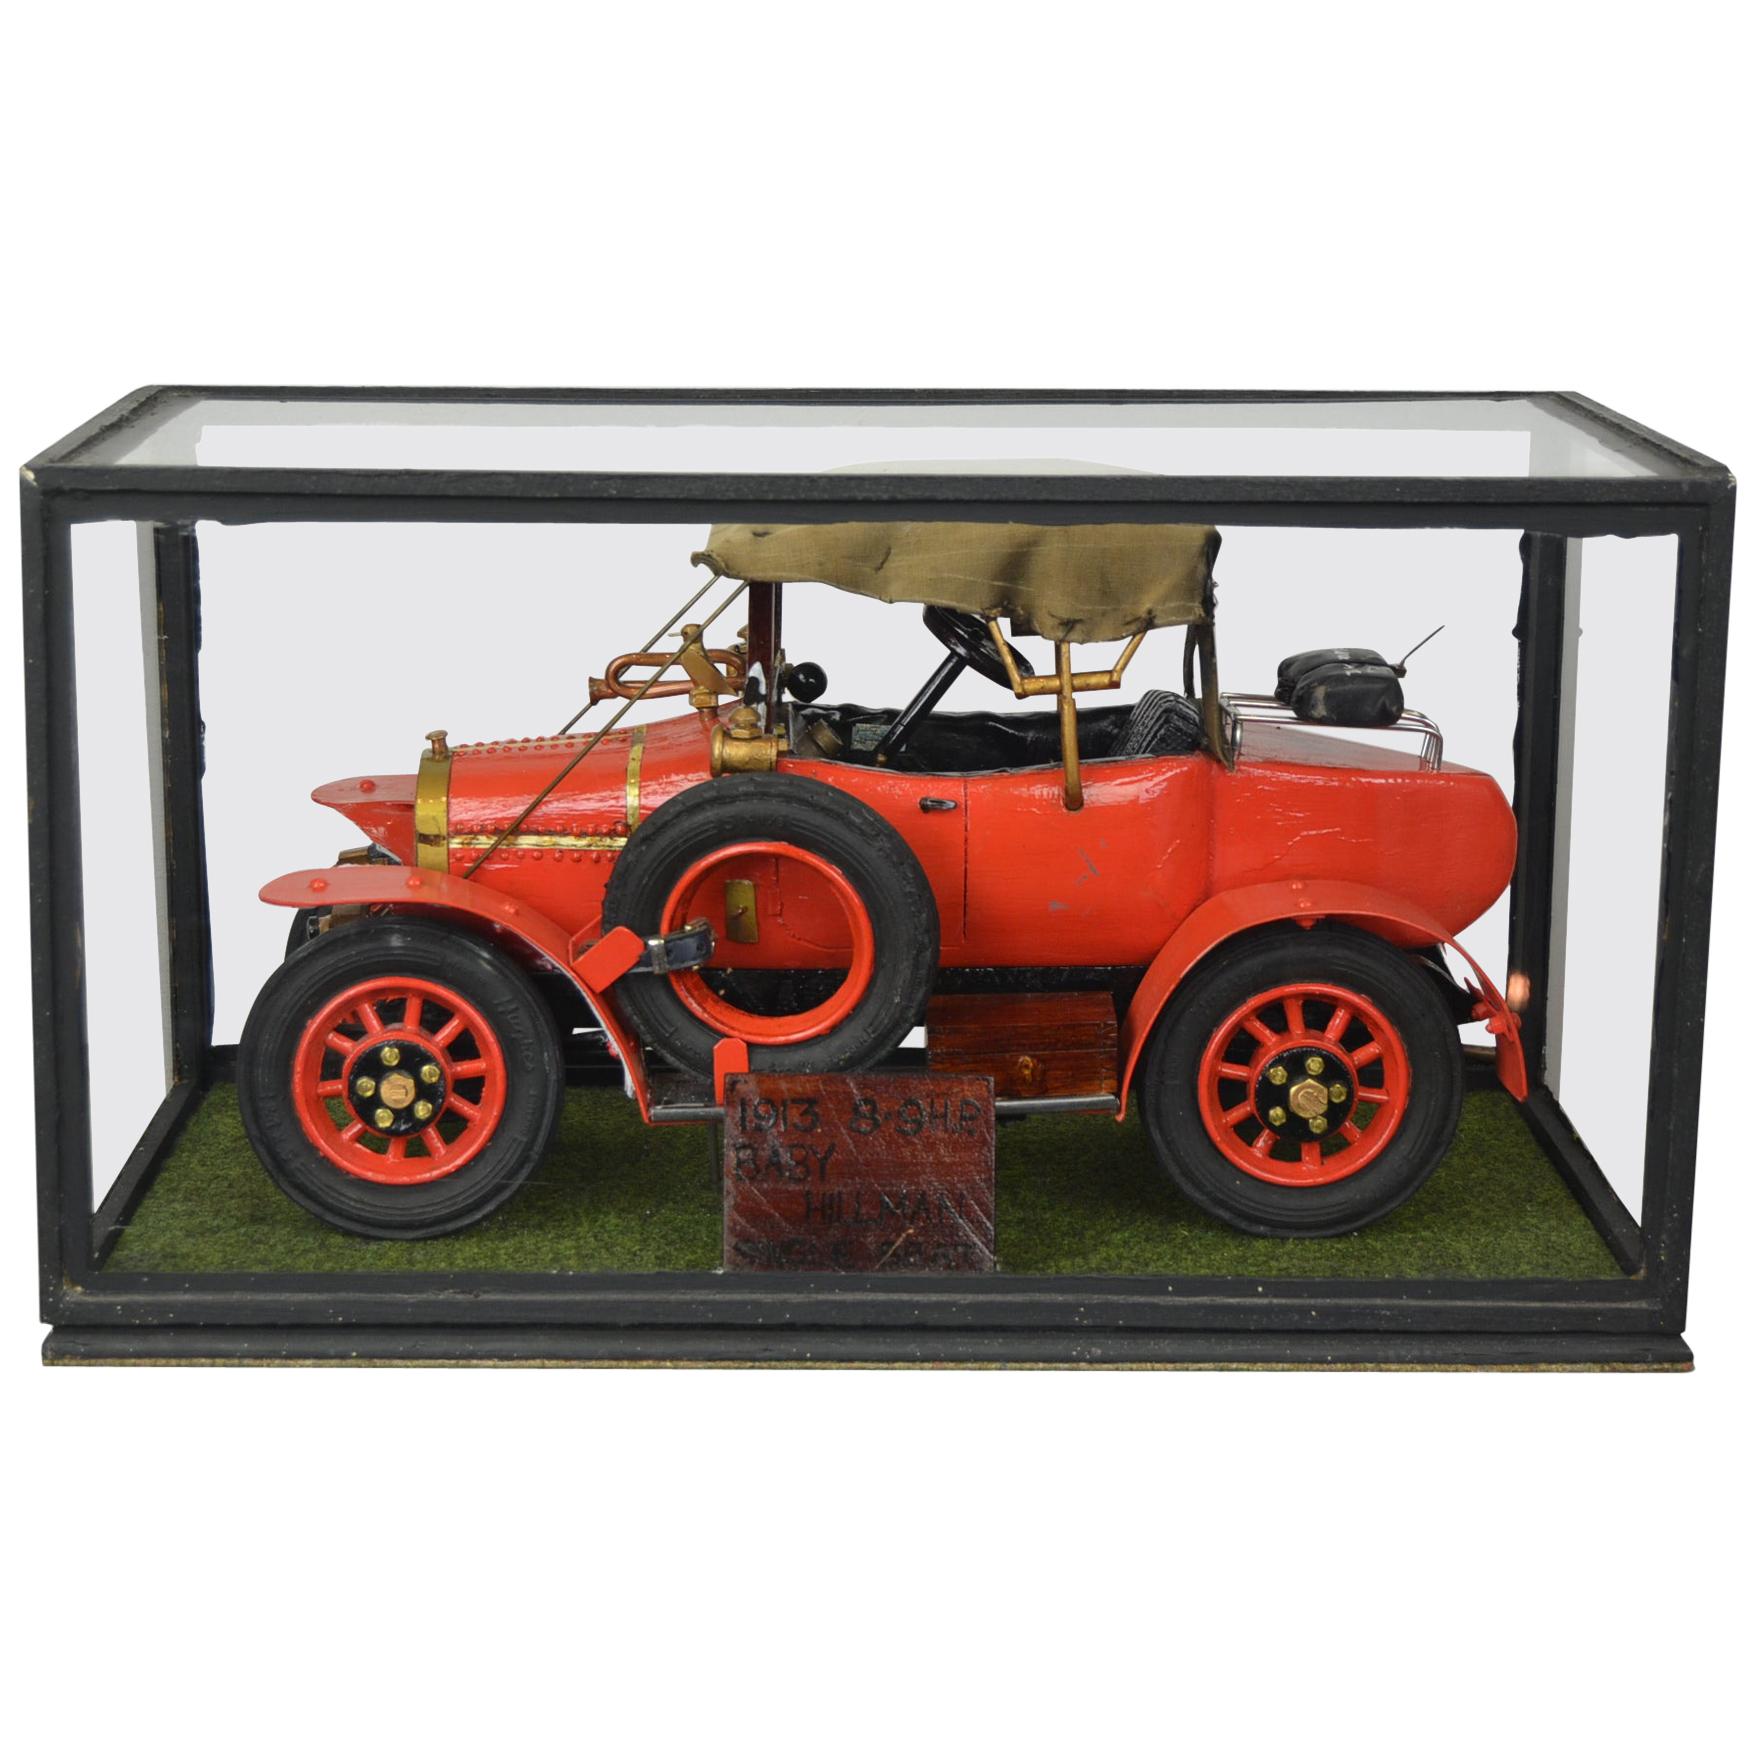 Large Hillman 8.9 Hp 1913 Model Car of Dr. H. Crippen, Handcrafted, 1960s